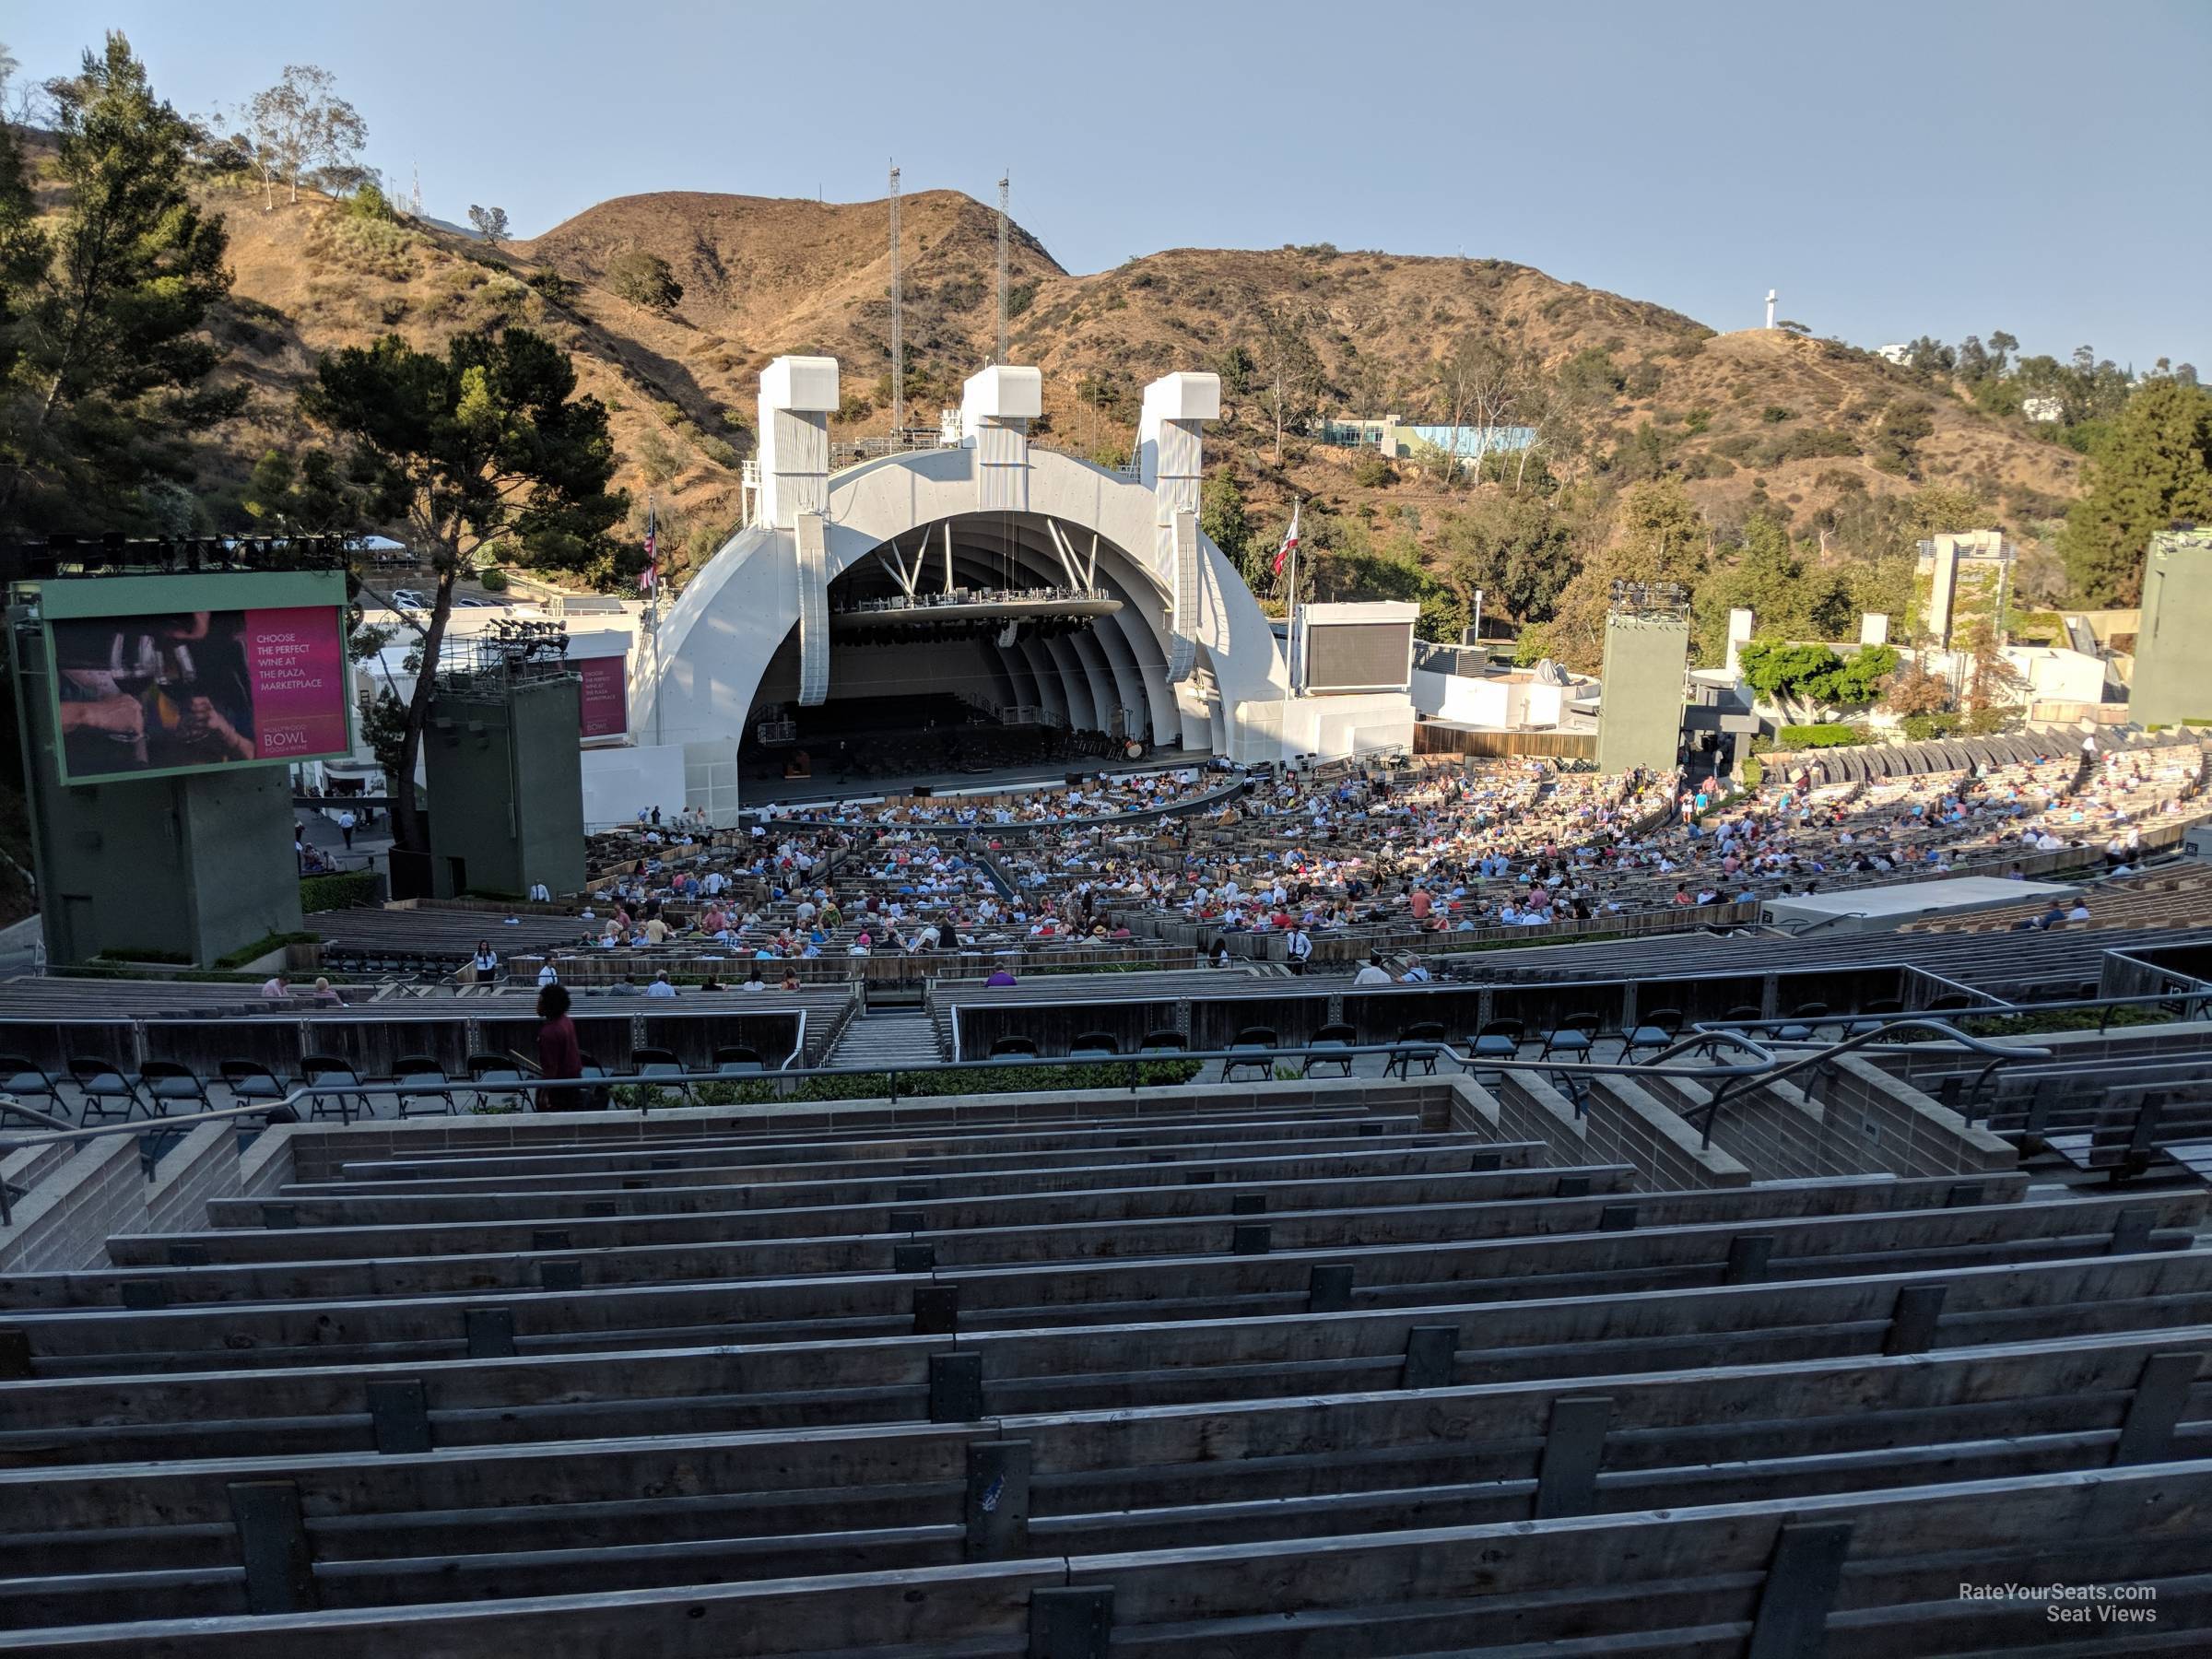 section p2, row 14 seat view  - hollywood bowl